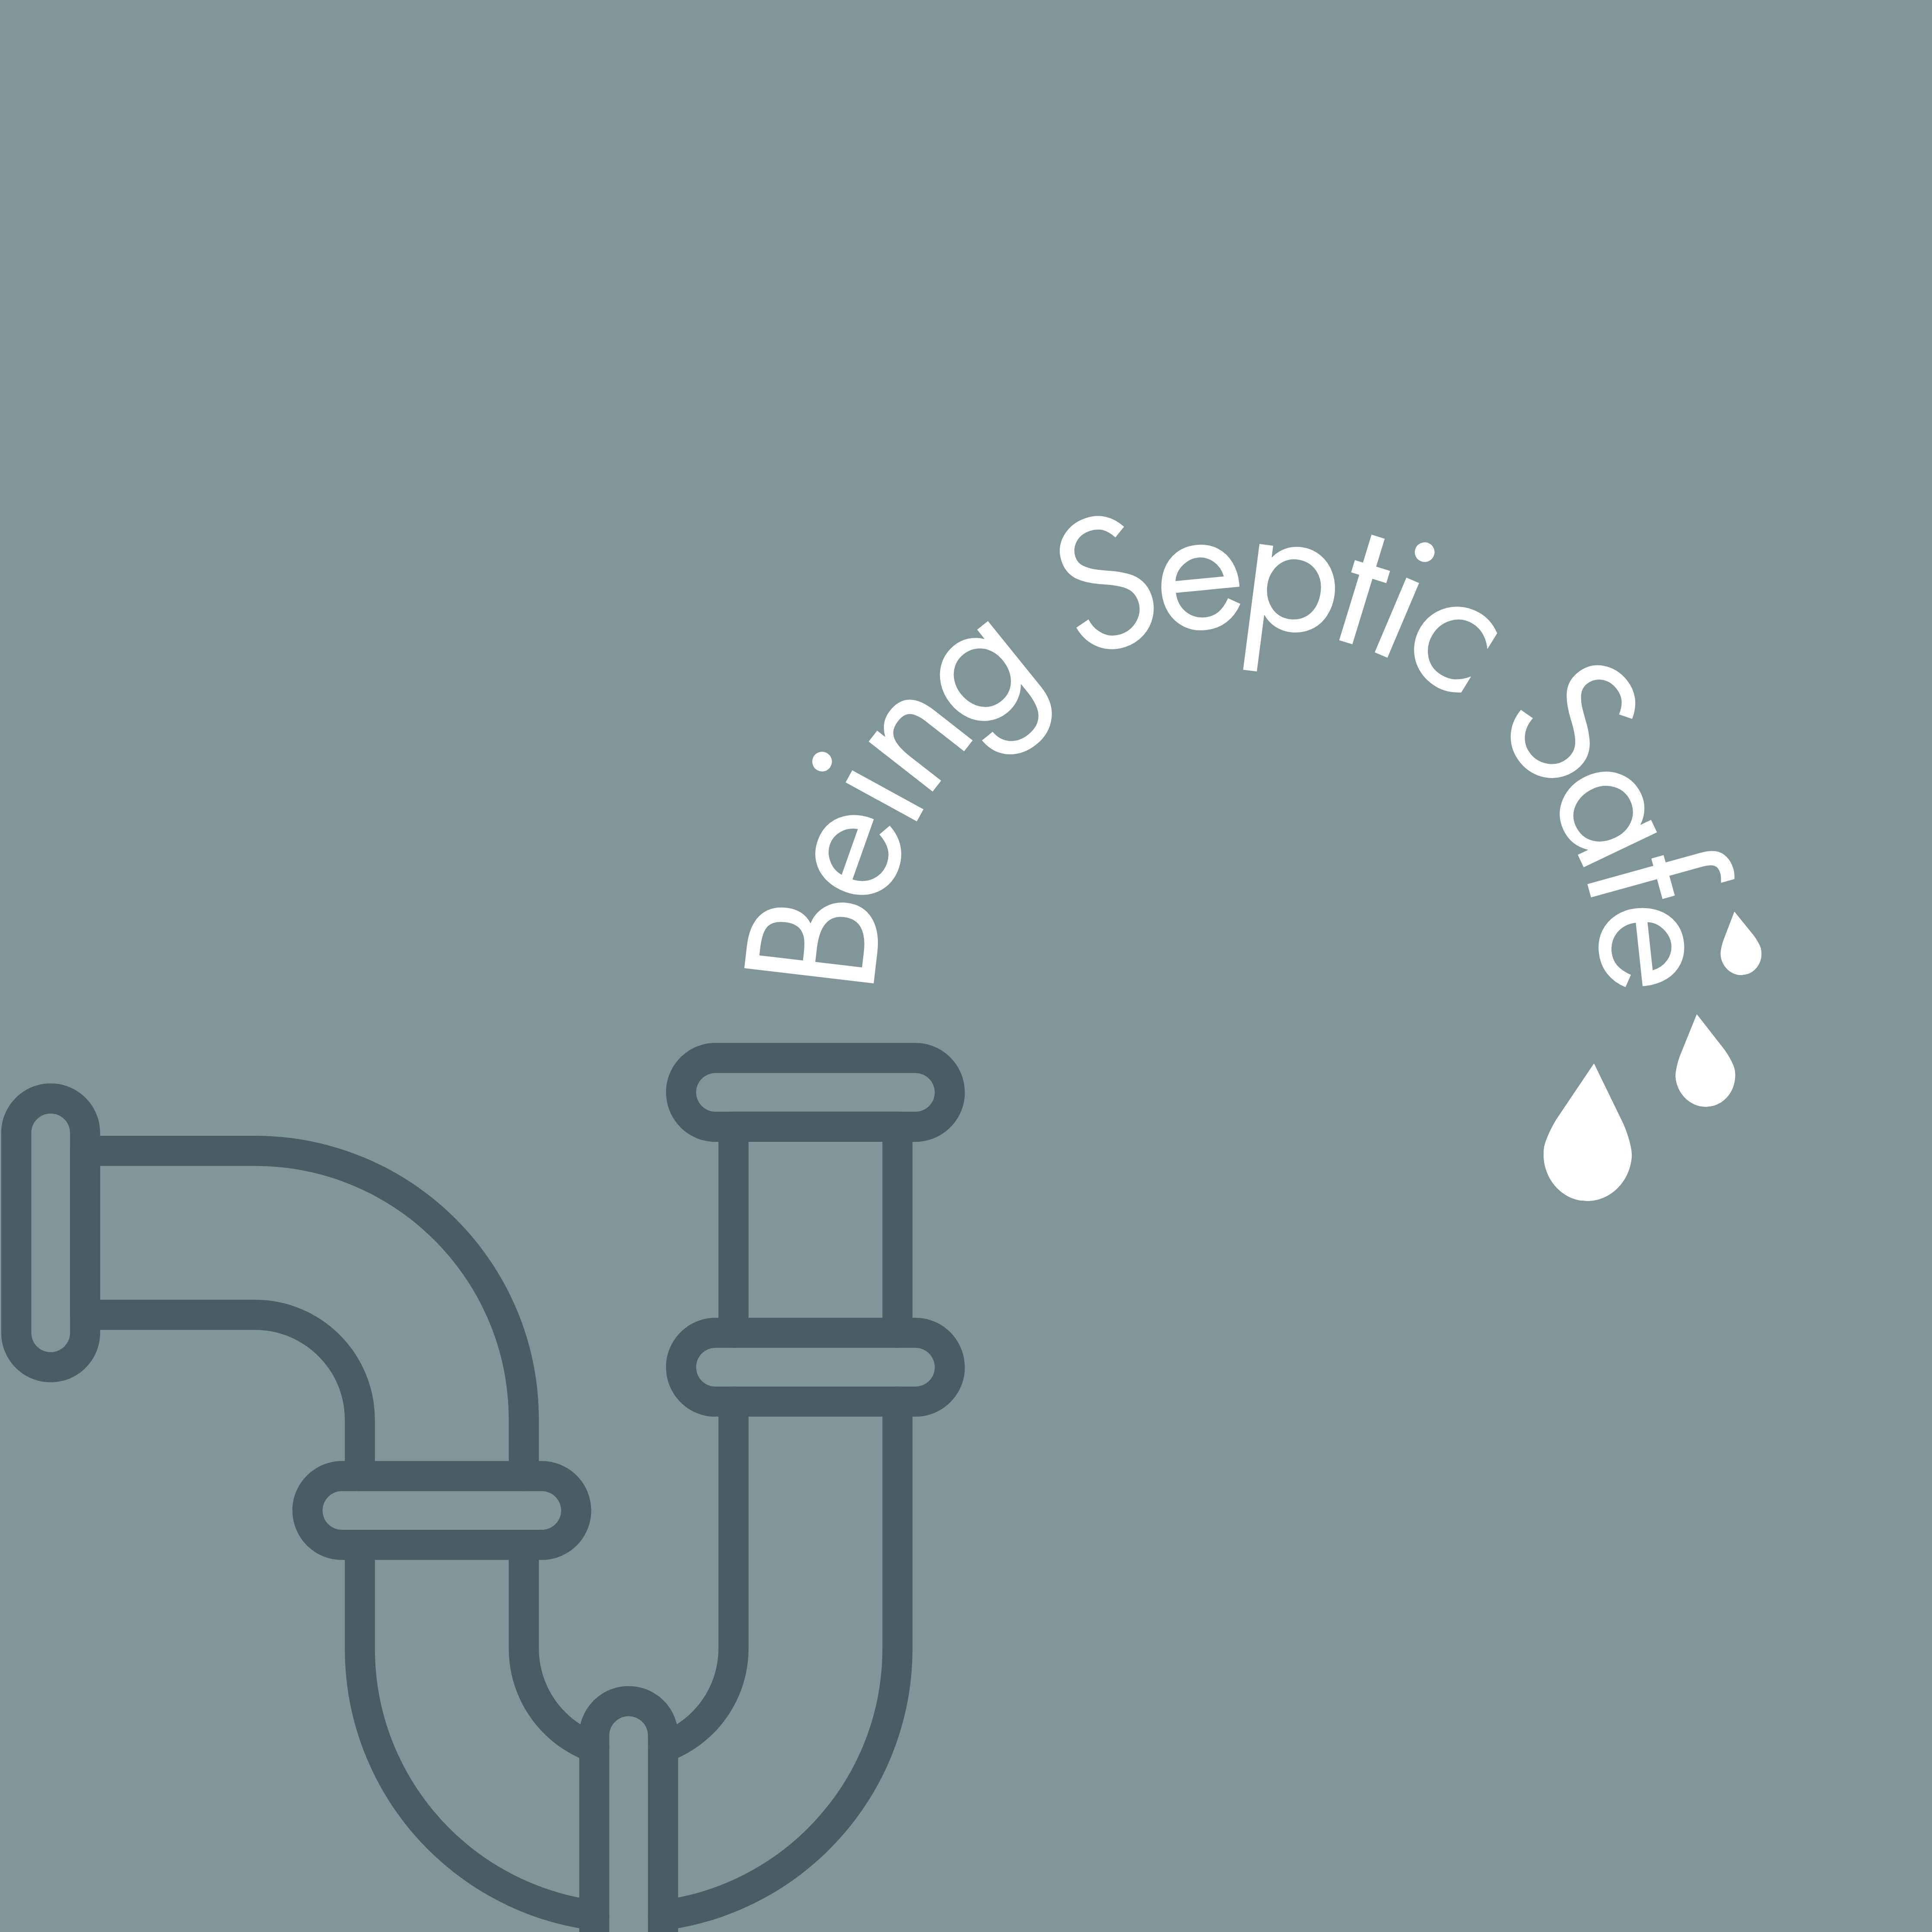 Being septic safe